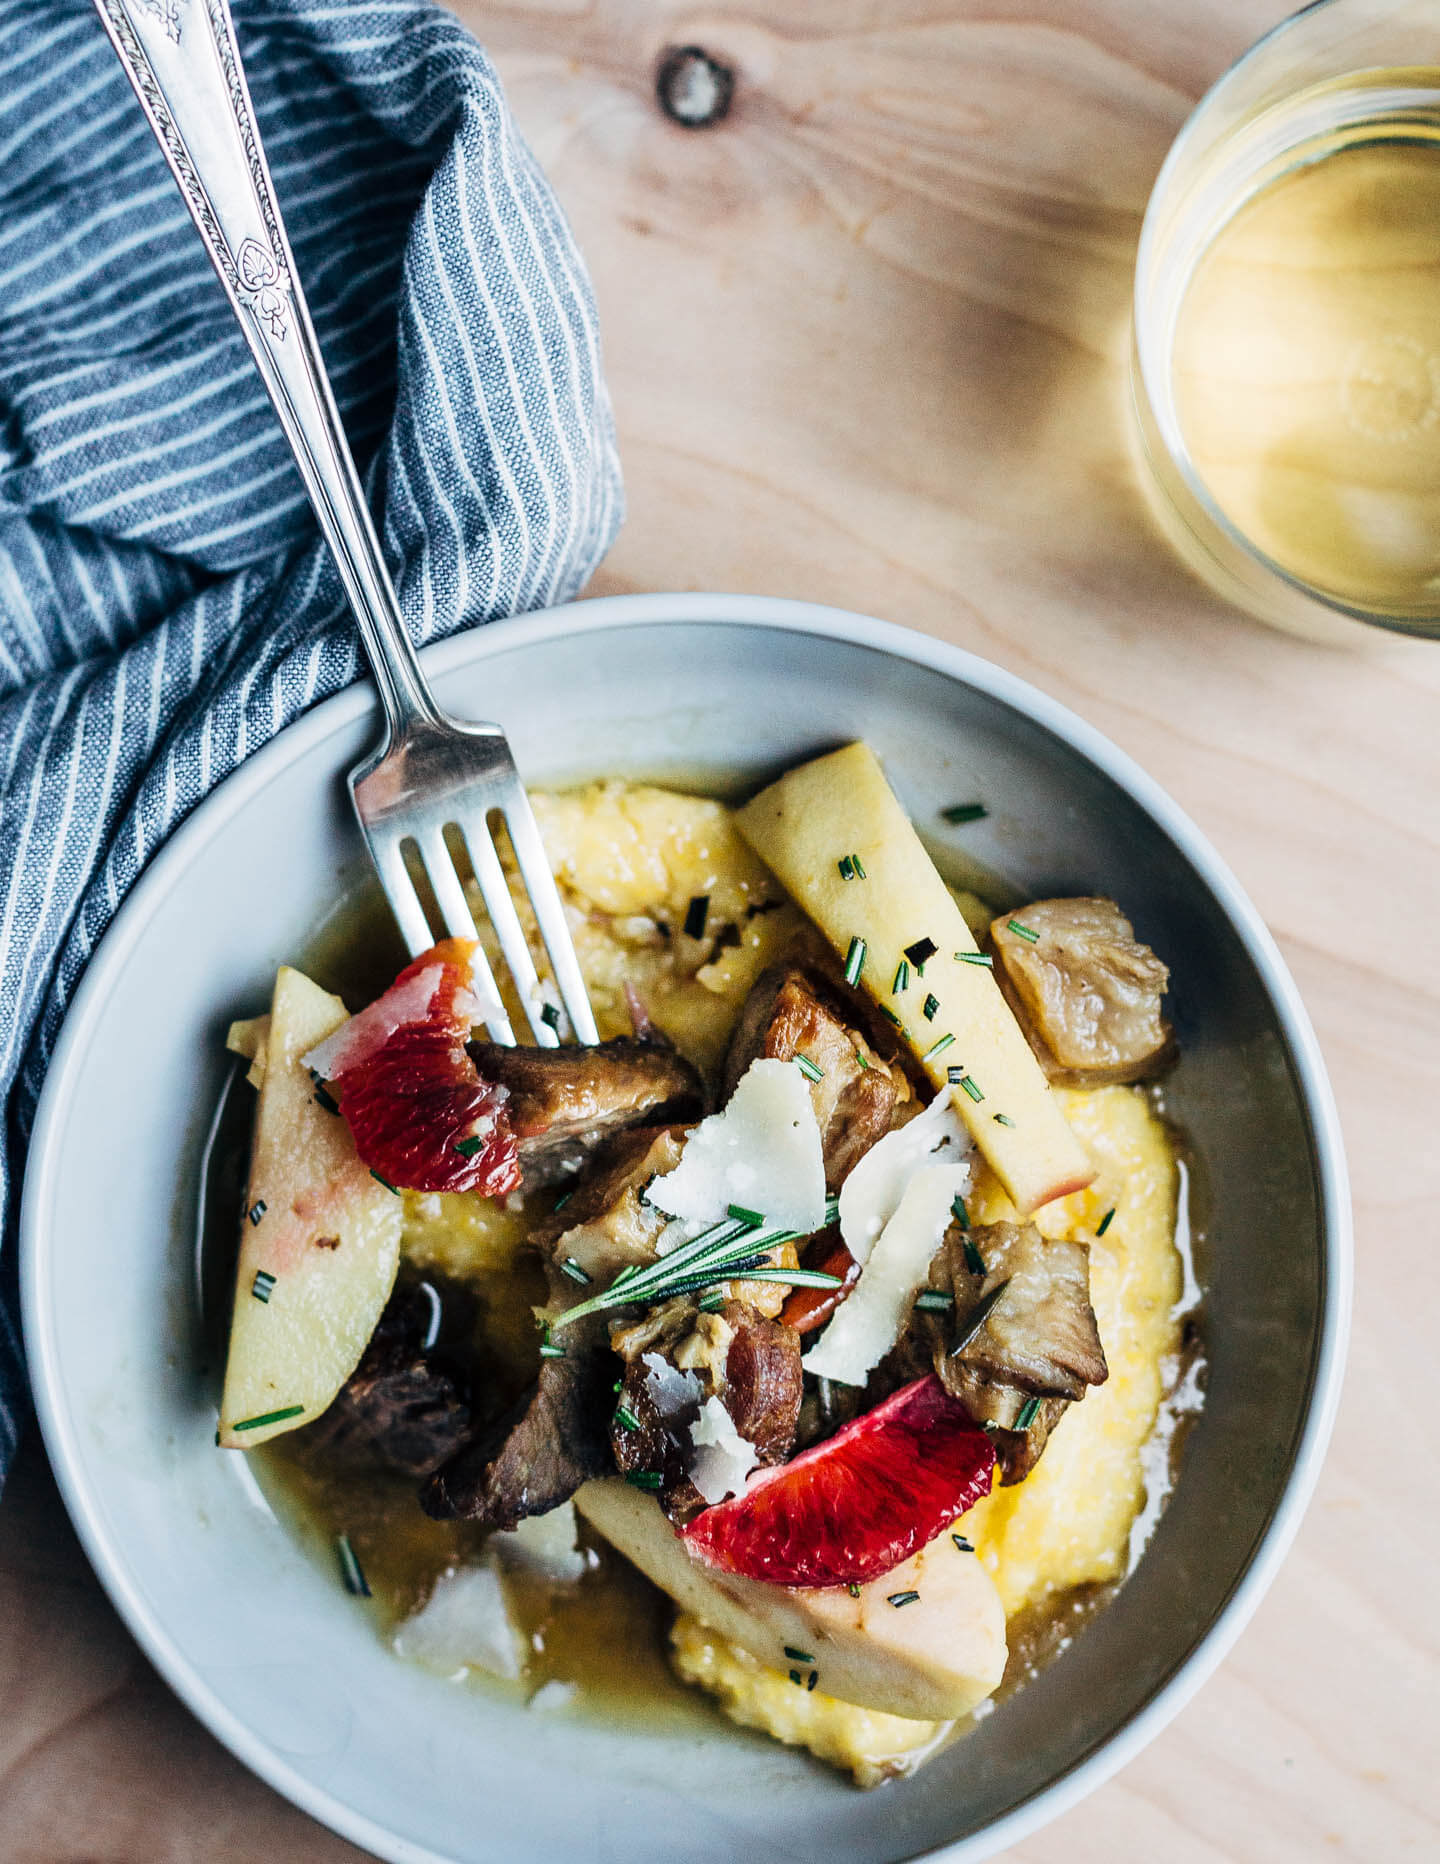 A simple and savory wintry stew featuring braised pork with apples, rosemary, chilies, and citrus served over polenta. 